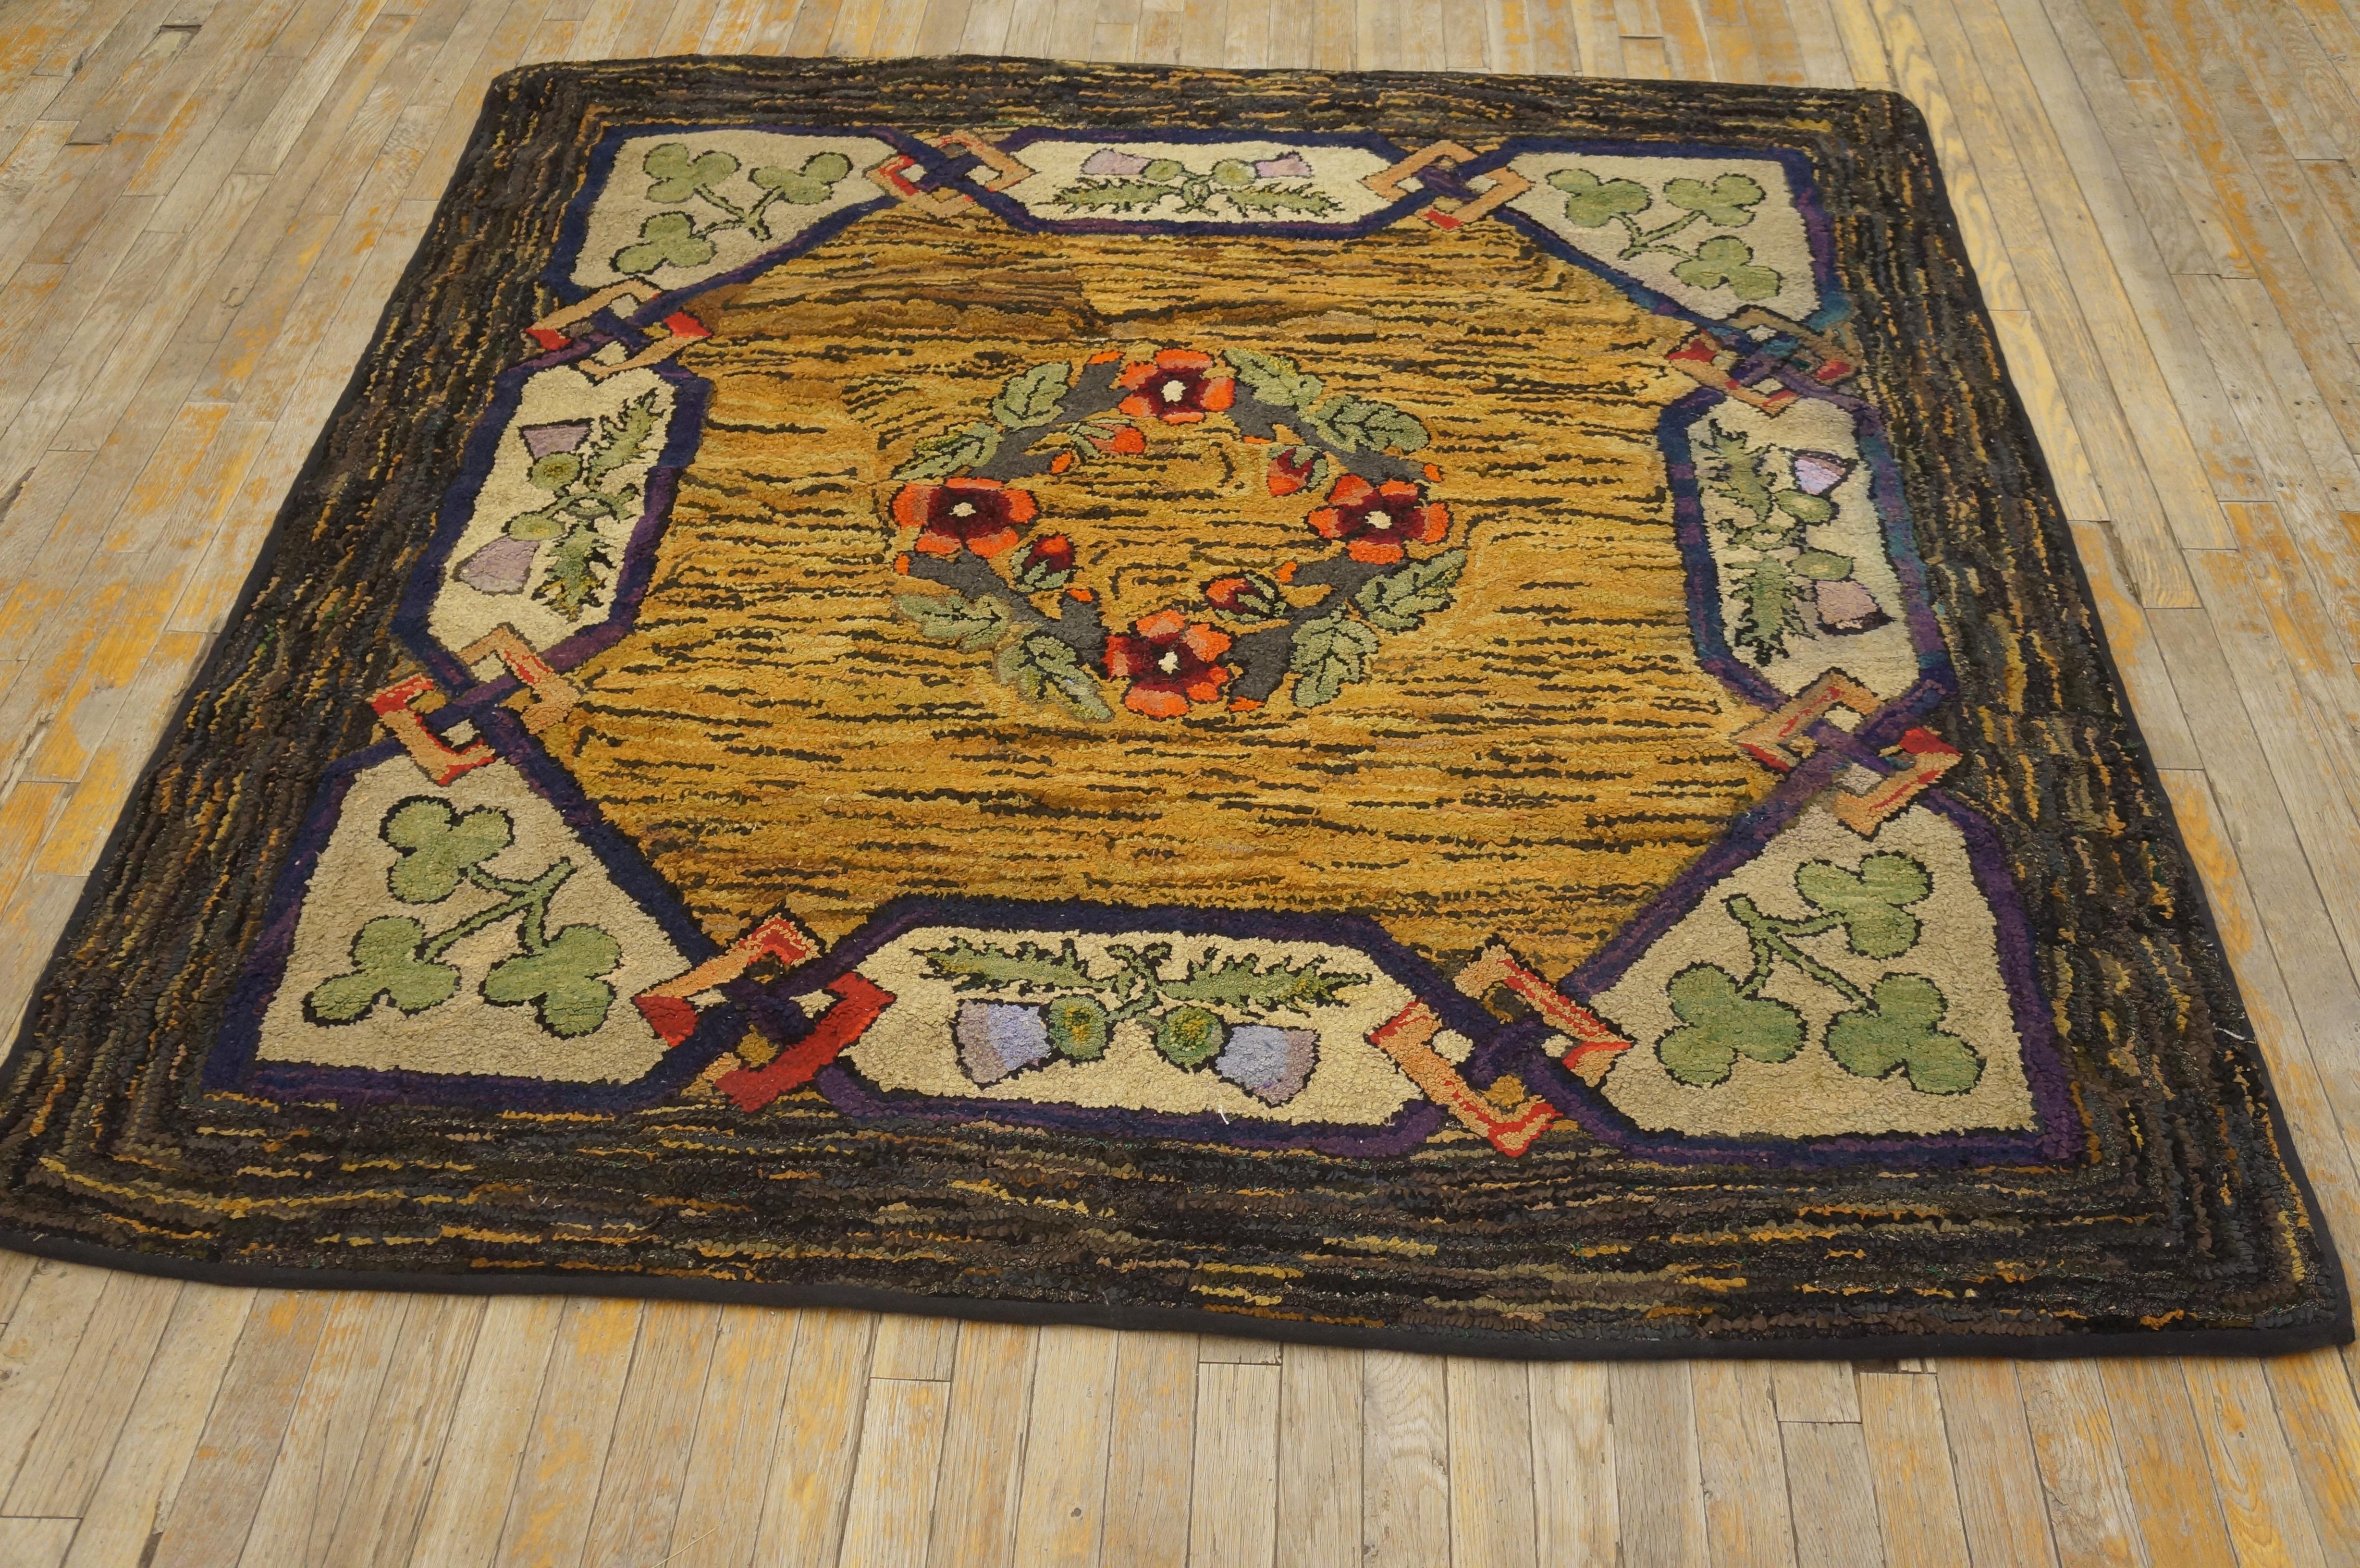 Early 20th Century American Hooked Rug with Arts & Crafts Design Influence 
( 6' x 6' - 183 x 183 )